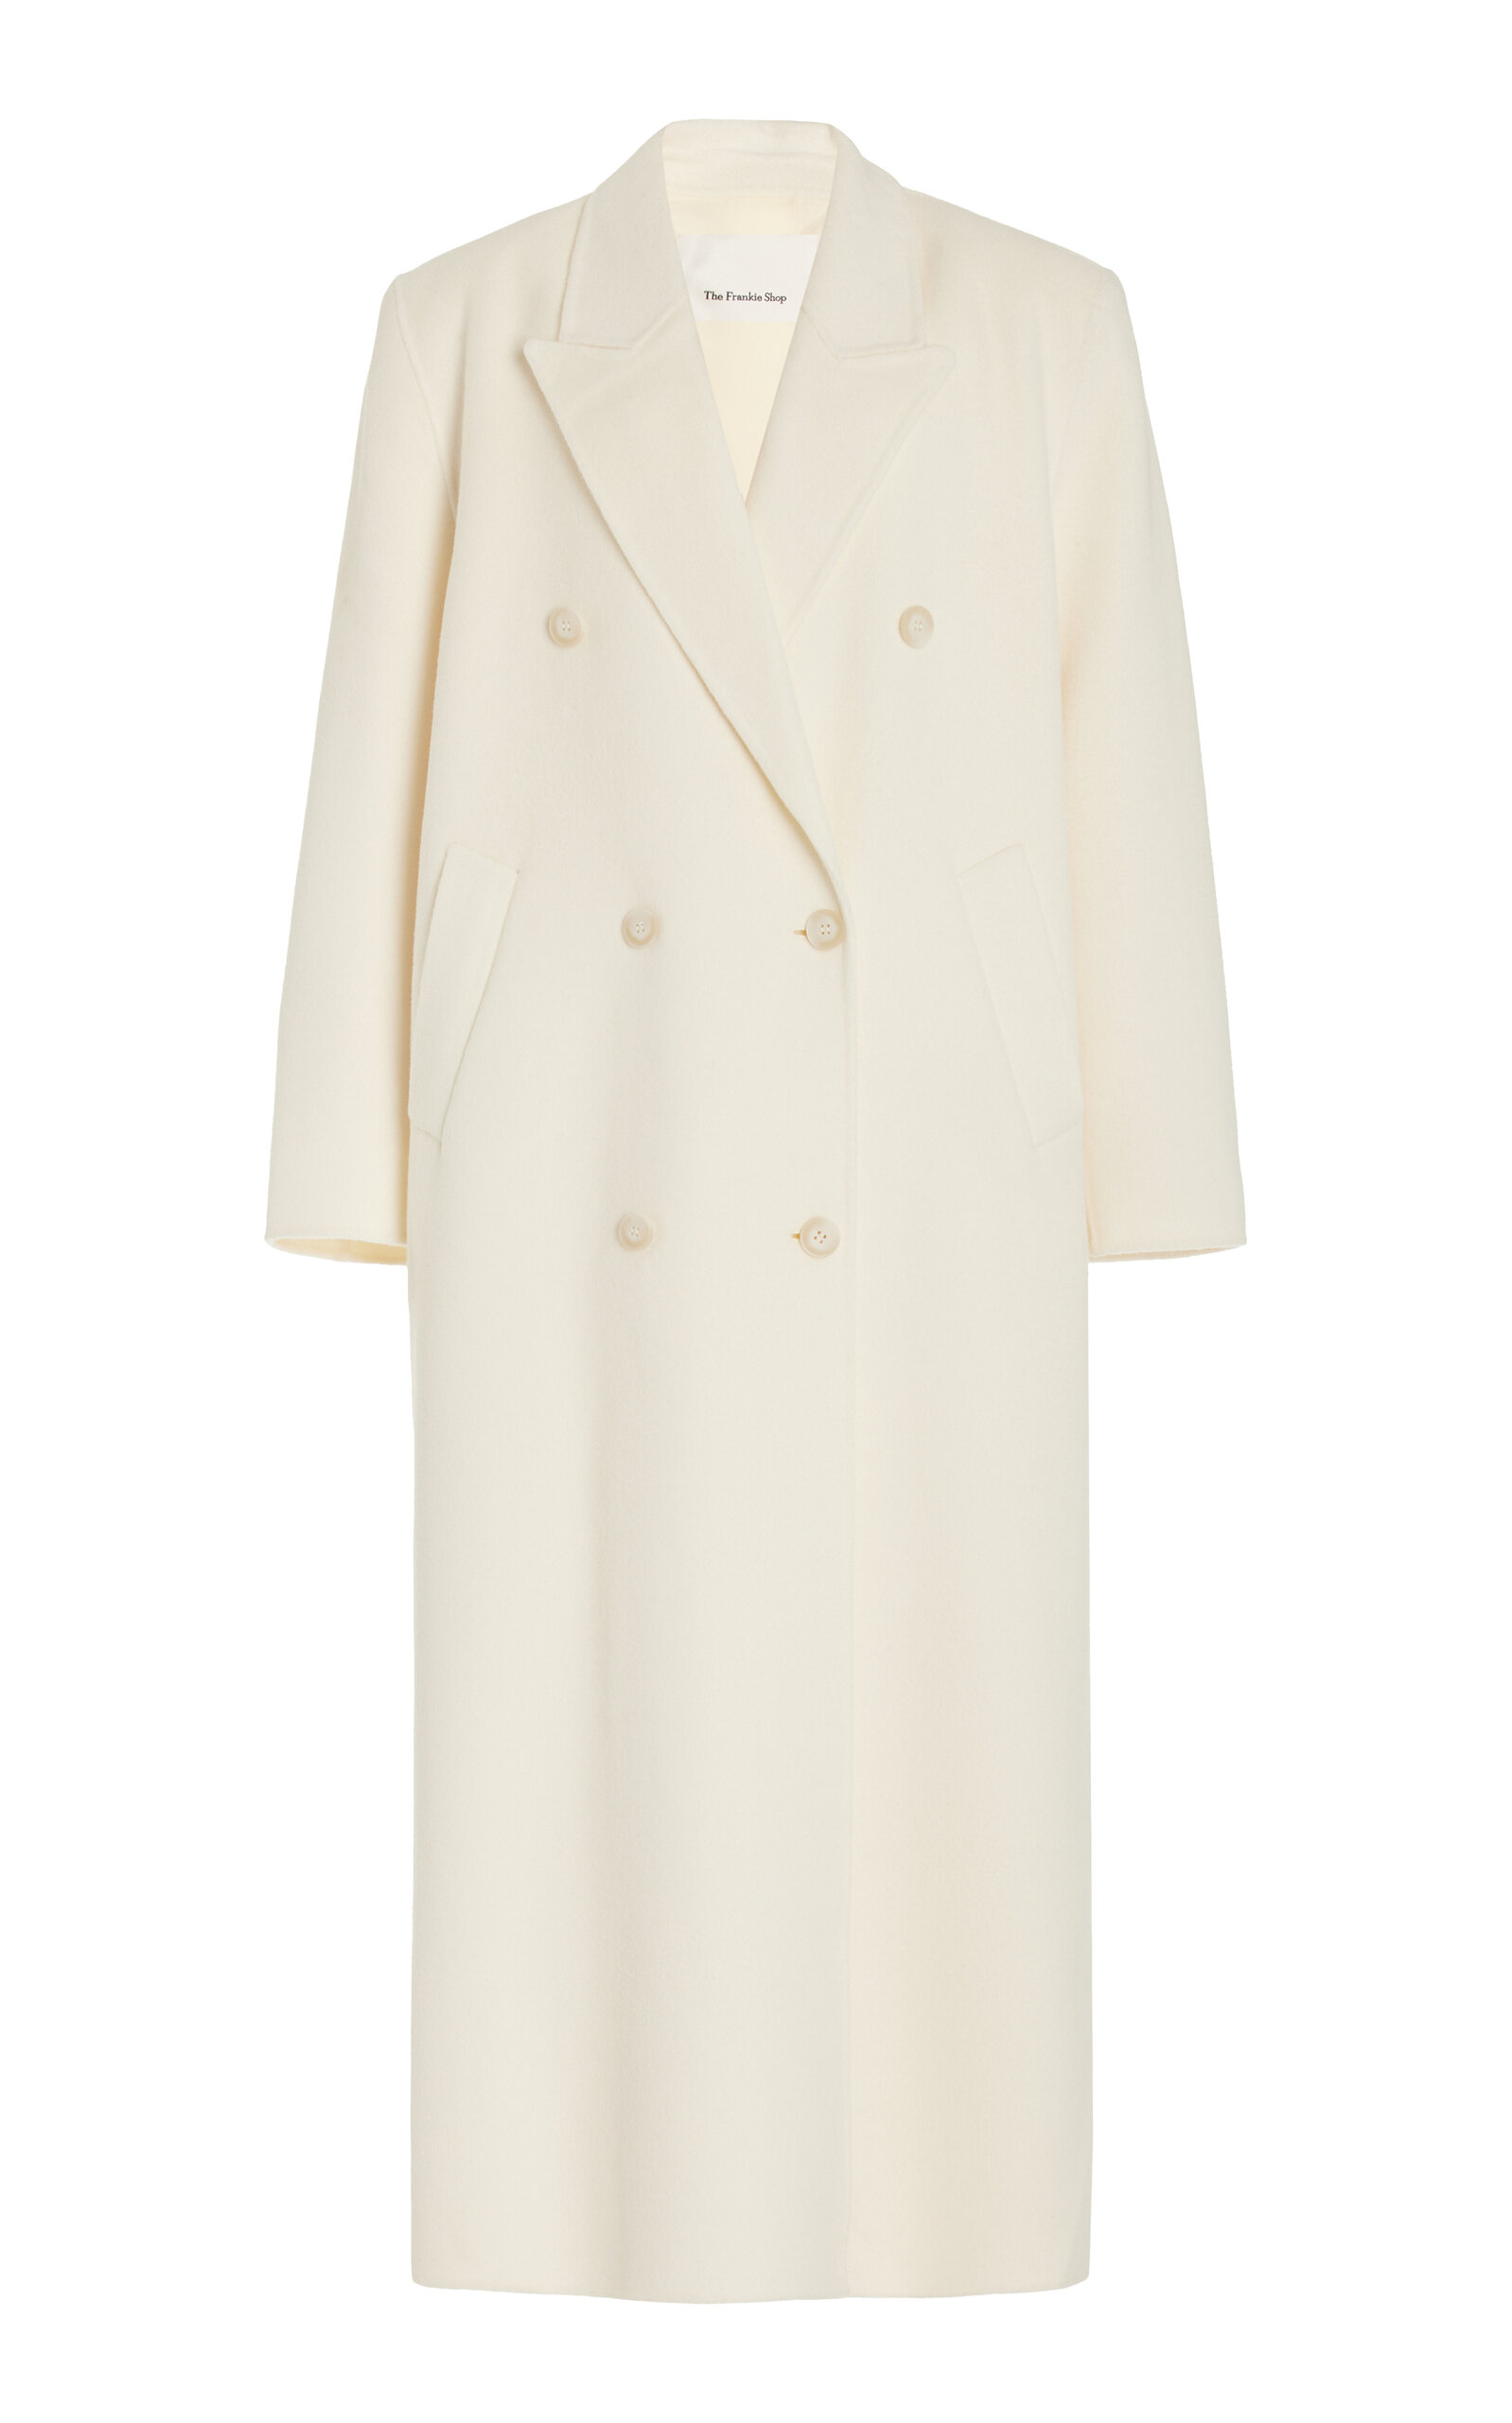 THE FRANKIE SHOP GAIA DOUBLE-BREASTED WOOL-BLEND COAT